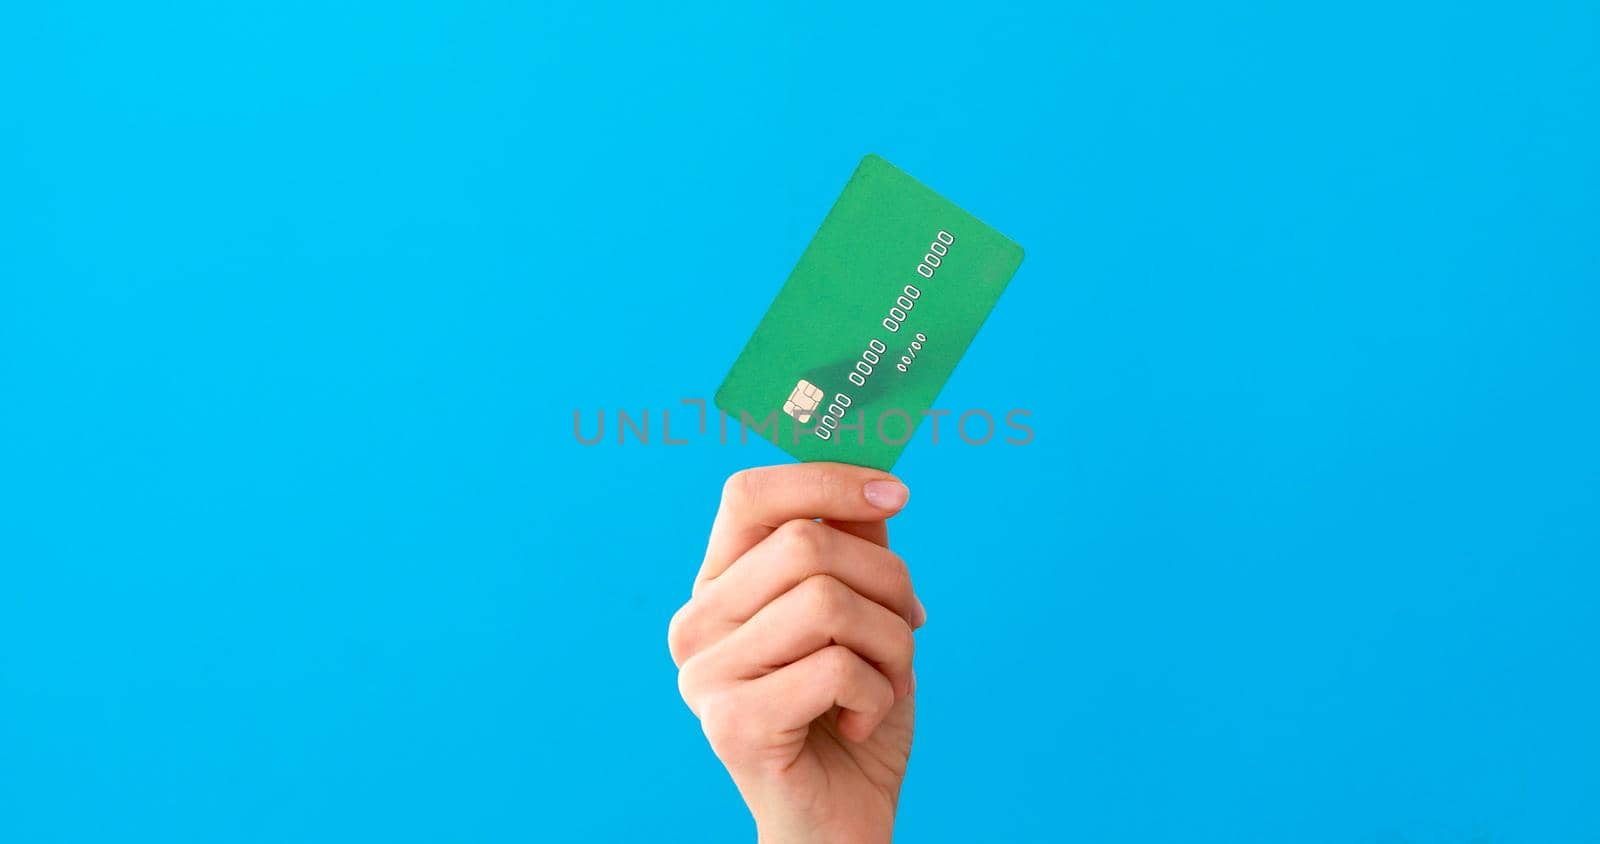 Hand holding mockup credit cards and showing on the blue background